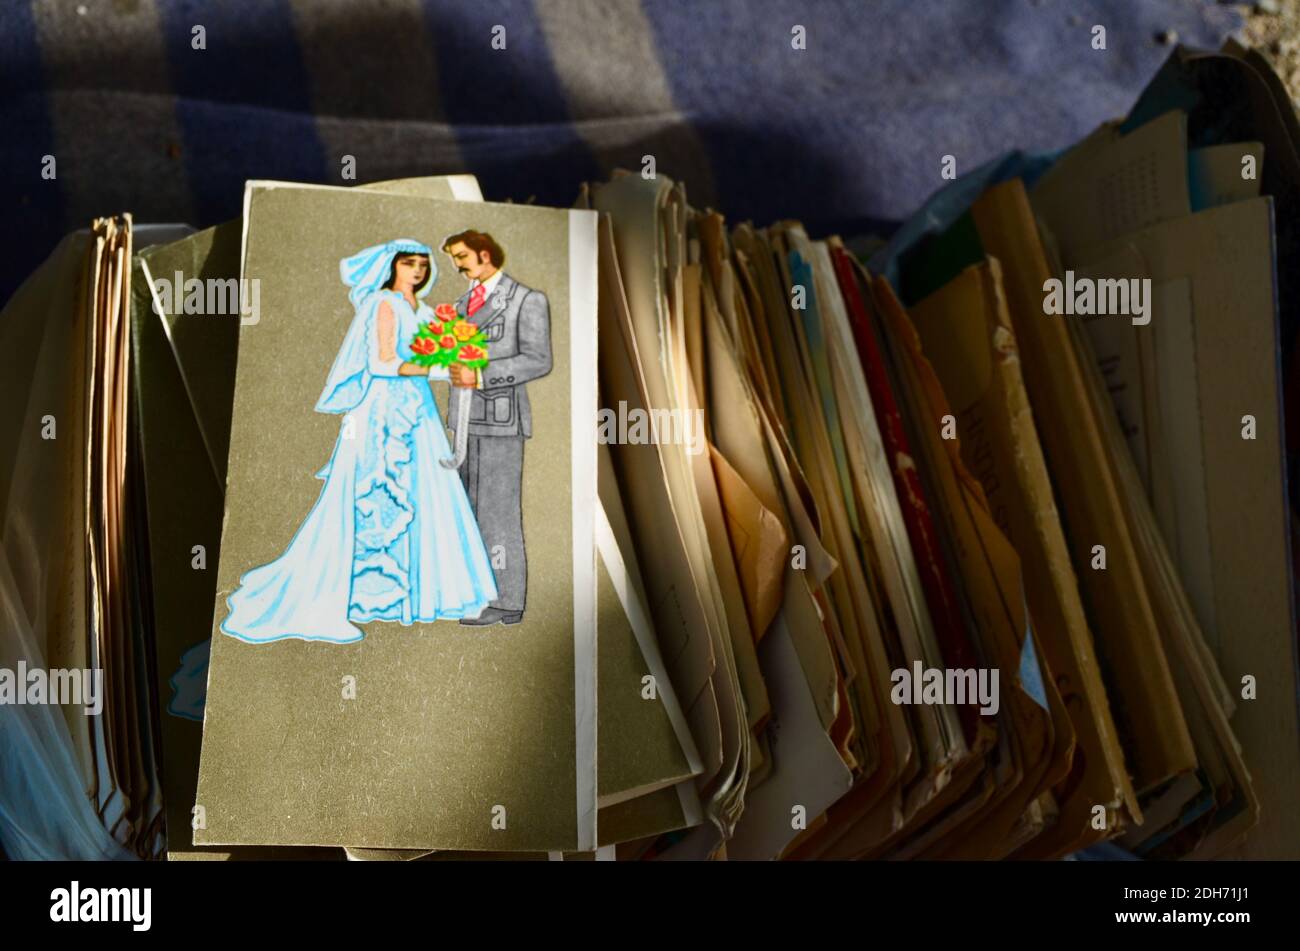 An old wedding card sold at a street market in Tbilisi, Georgia Stock Photo